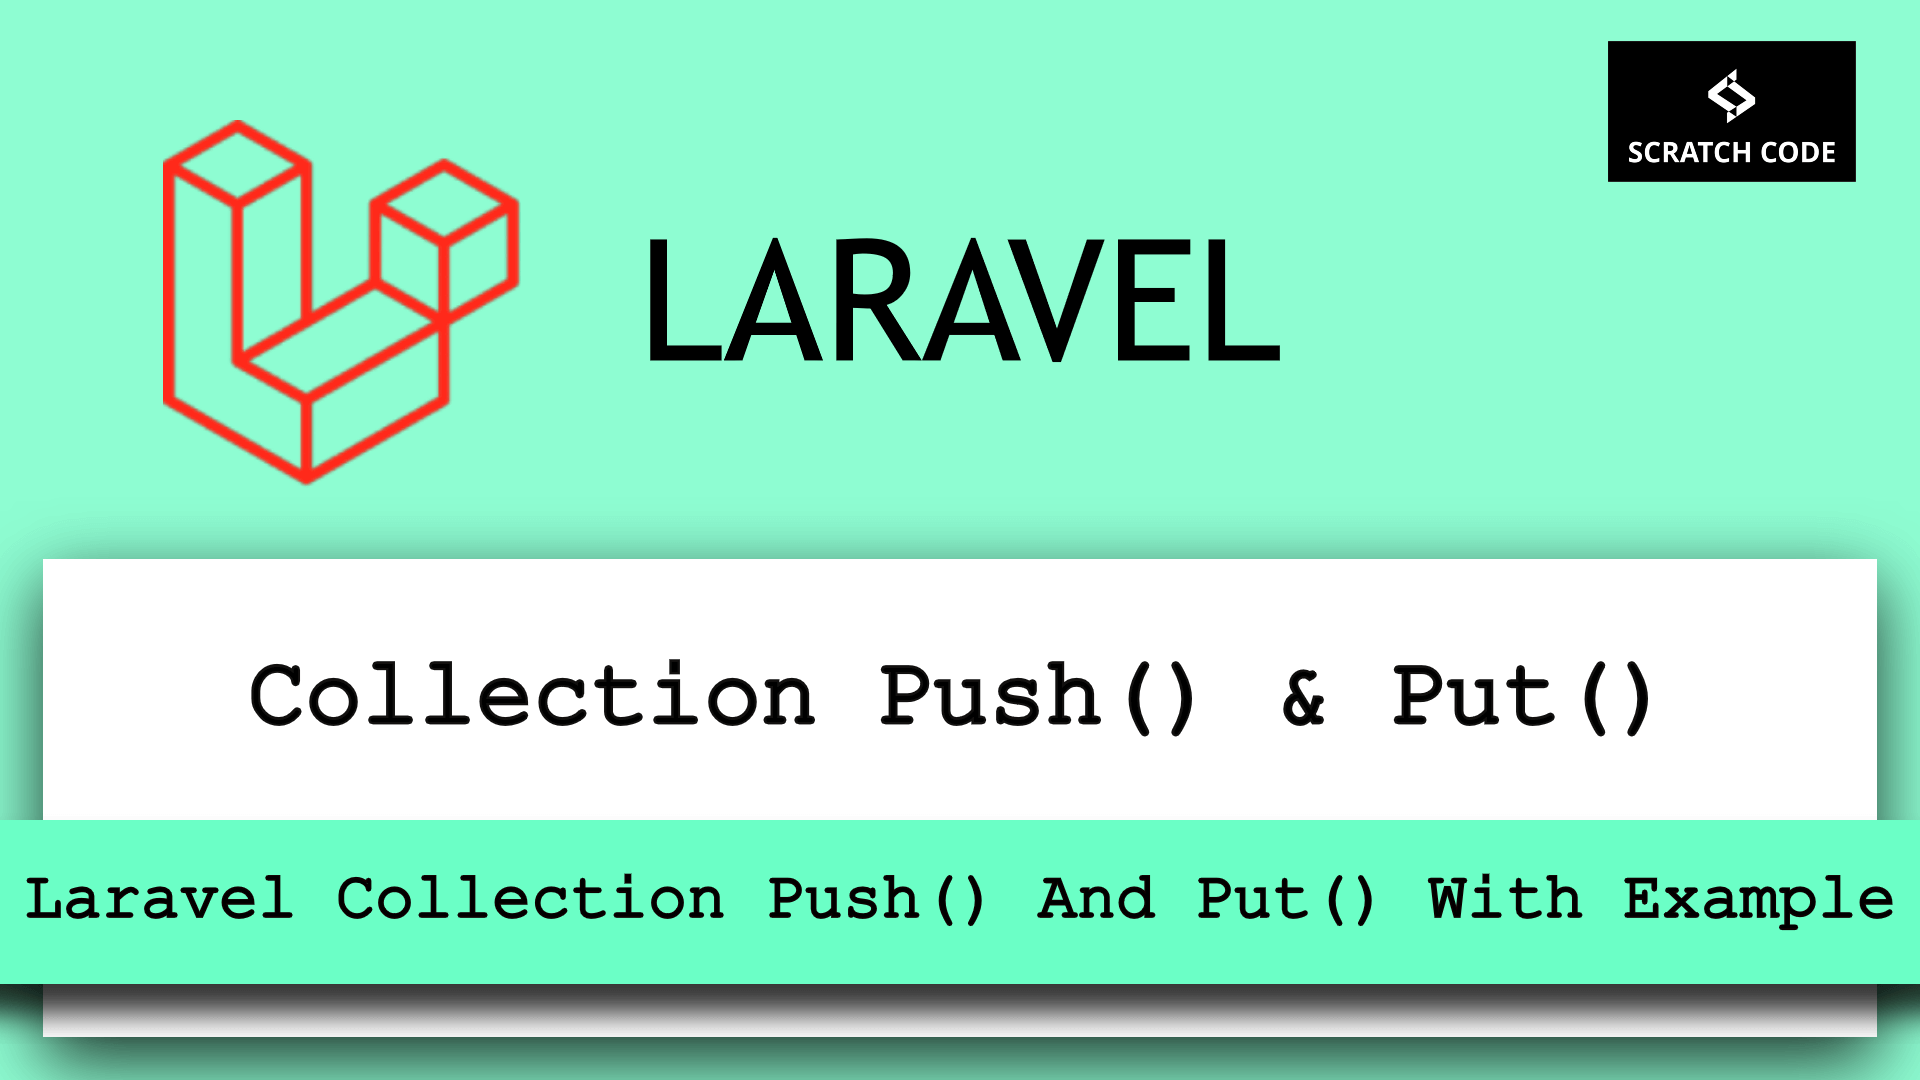 laravel collection push and put with example